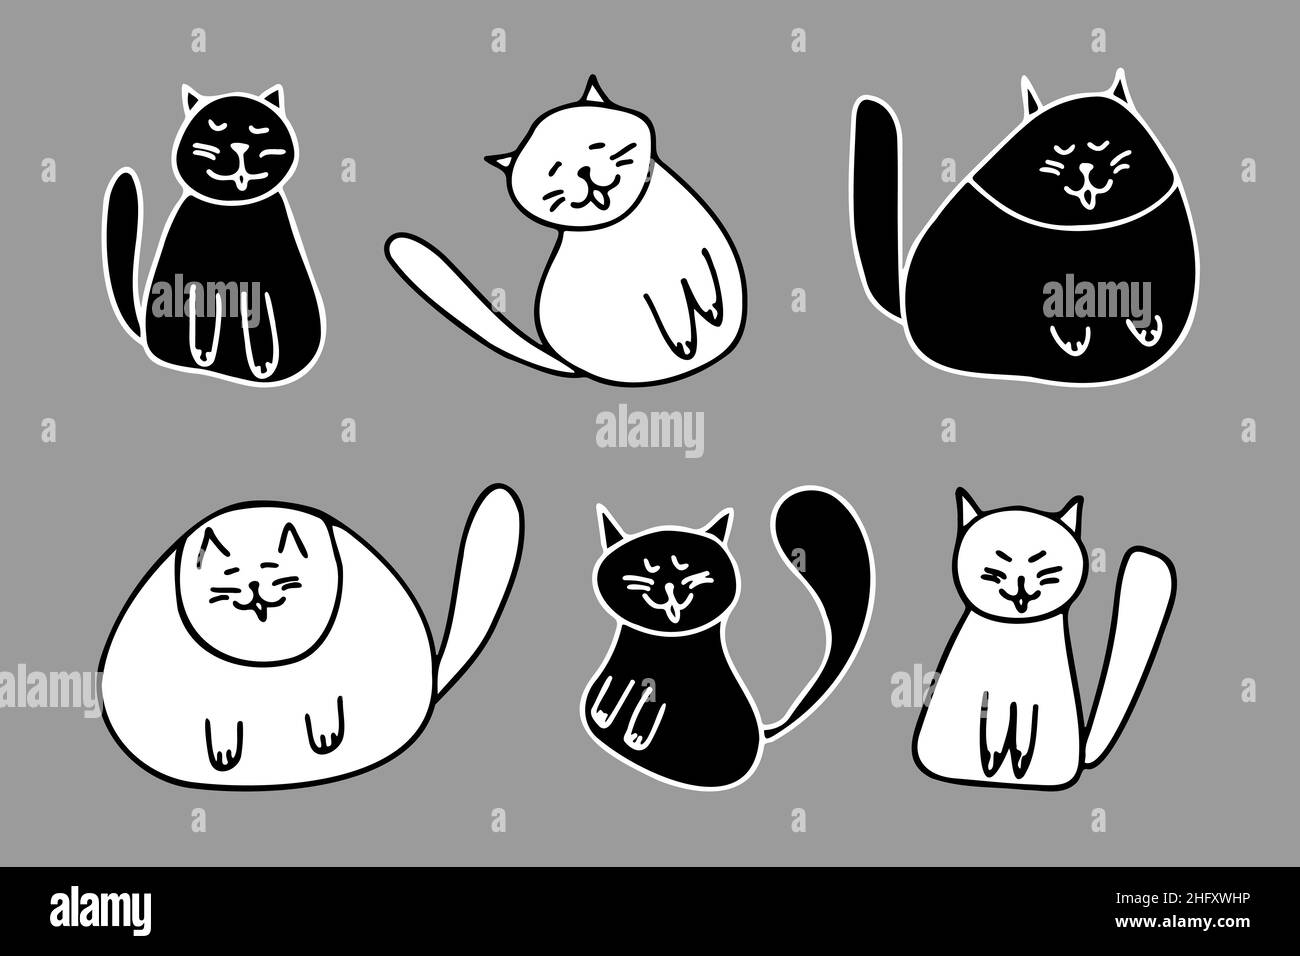 Funny plumpy black and white cats set. Vector illustration of cute hand drawn cats. Kitty mascote isolated for card children design Stock Vector